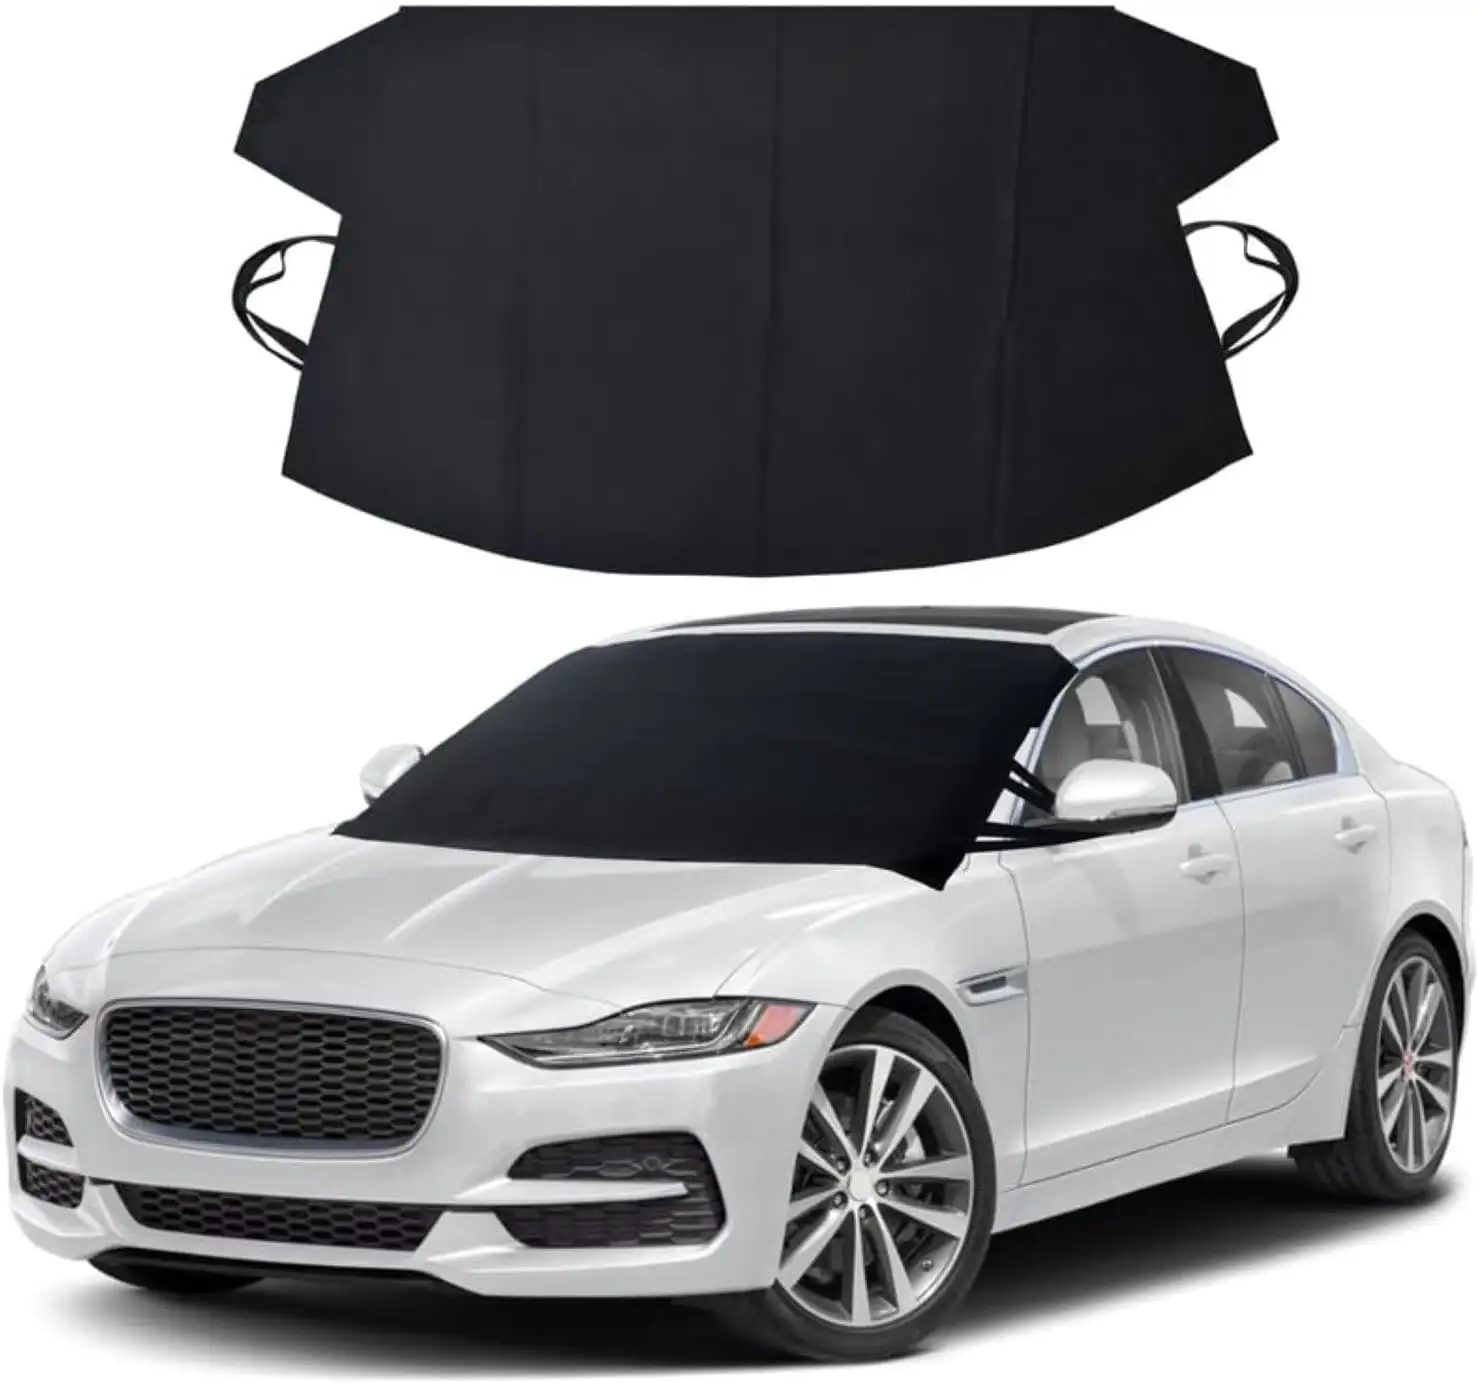 Hot Selling Sunshade Cover Car Windshield Snow Sun Shade Waterproof Dustproof Cover Car Front Windscreen Sunshade Cover